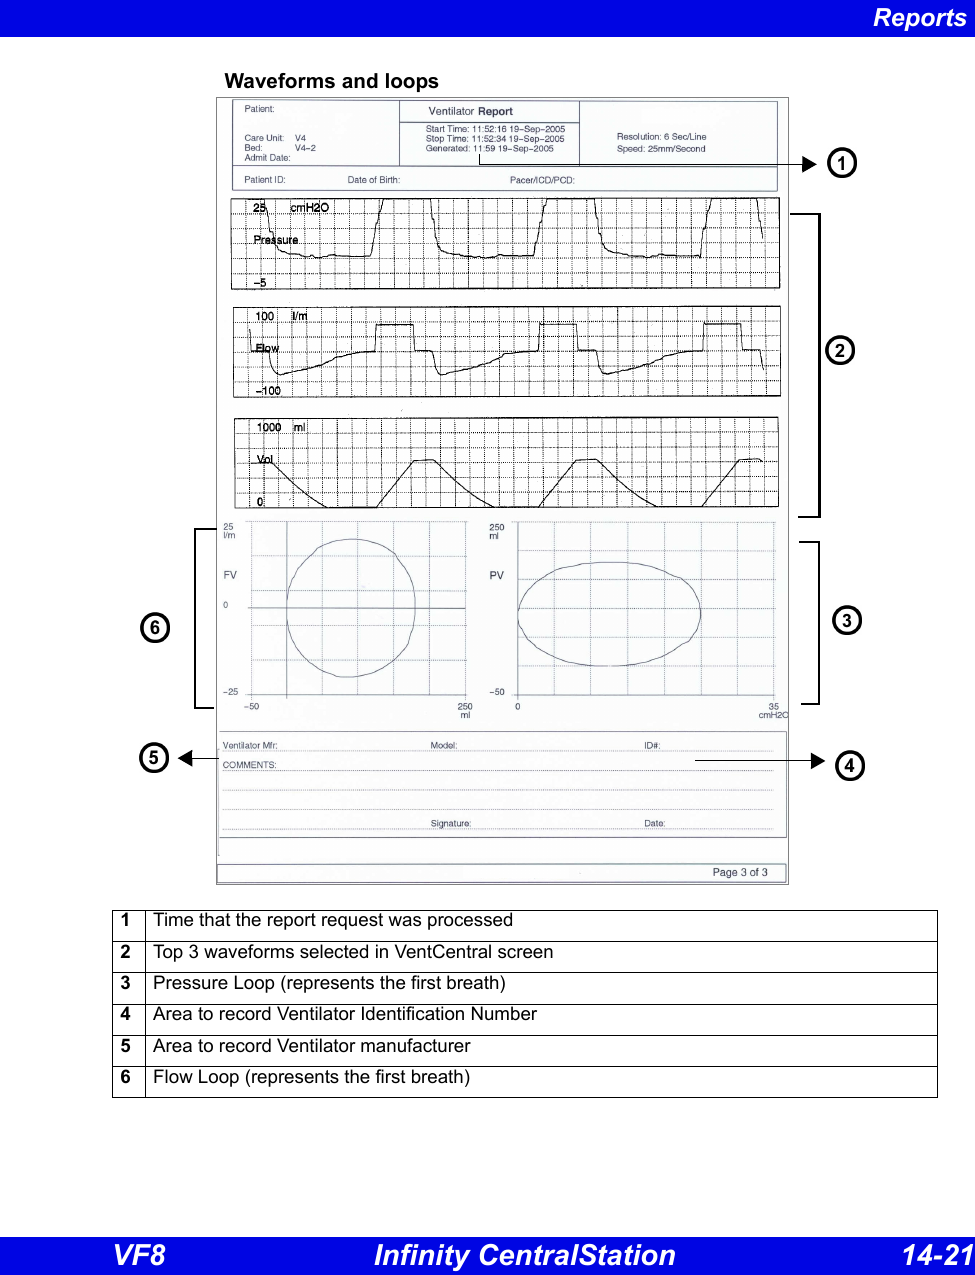 Reports VF8 Infinity CentralStation 14-21 Waveforms and loops1Time that the report request was processed2Top 3 waveforms selected in VentCentral screen3Pressure Loop (represents the first breath)4Area to record Ventilator Identification Number5Area to record Ventilator manufacturer6Flow Loop (represents the first breath)